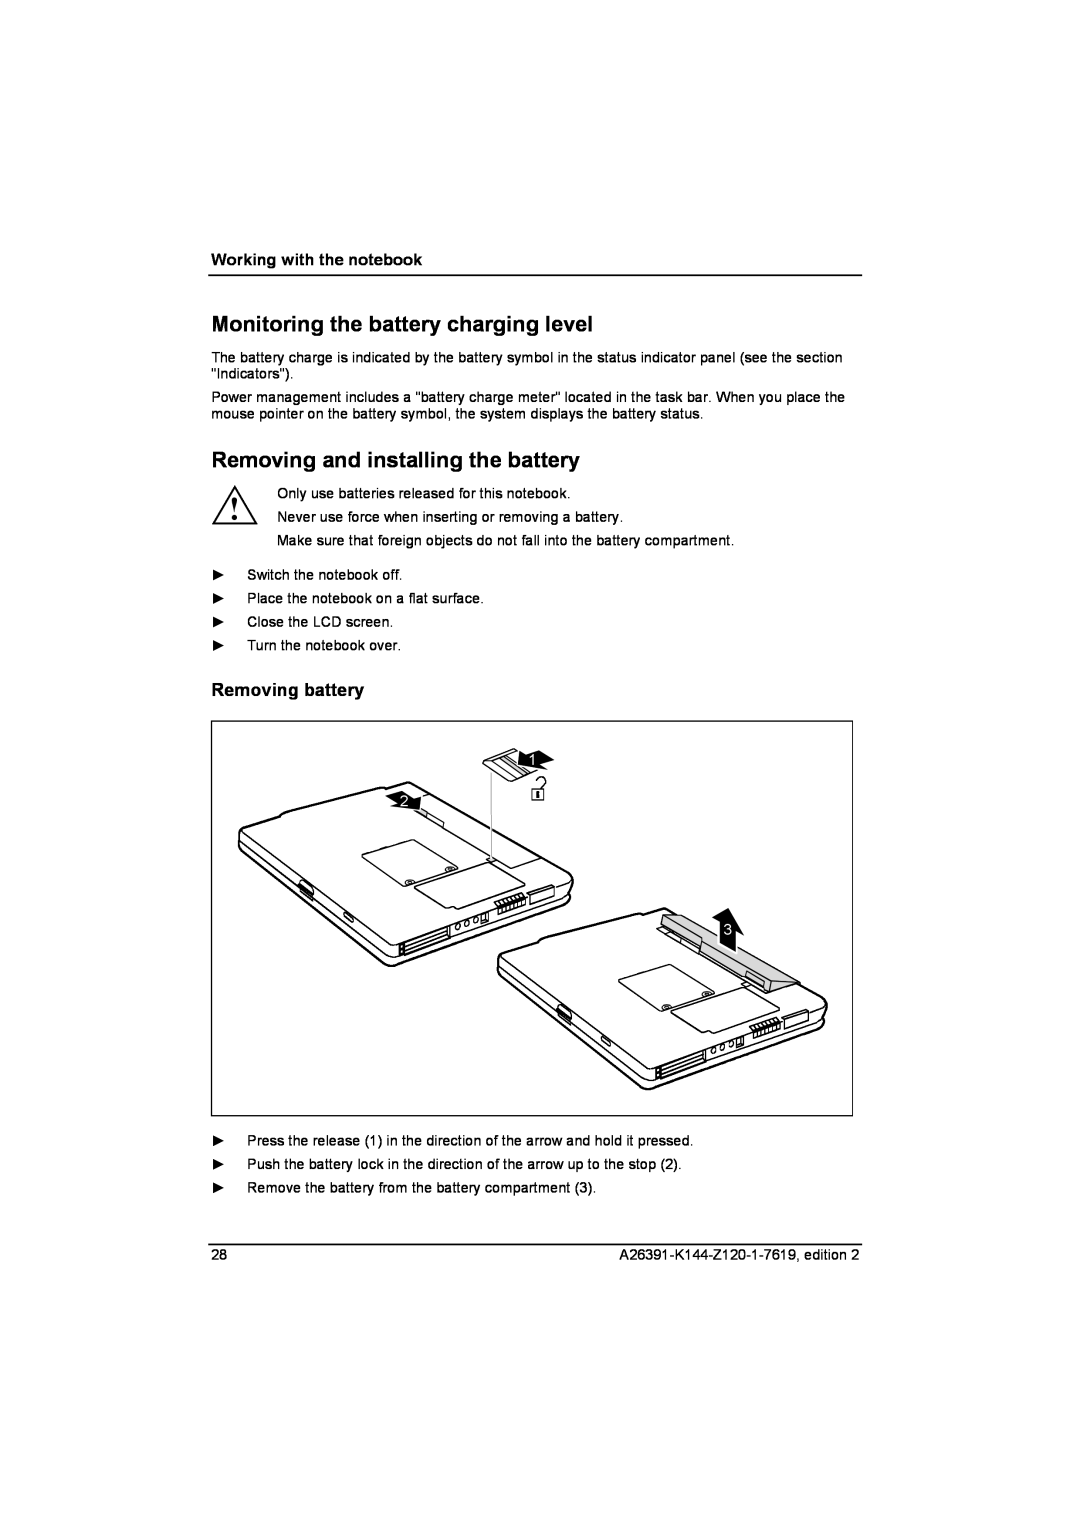 Fujitsu S SERIES manual Monitoring the battery charging level, Removing and installing the battery, Removing battery 